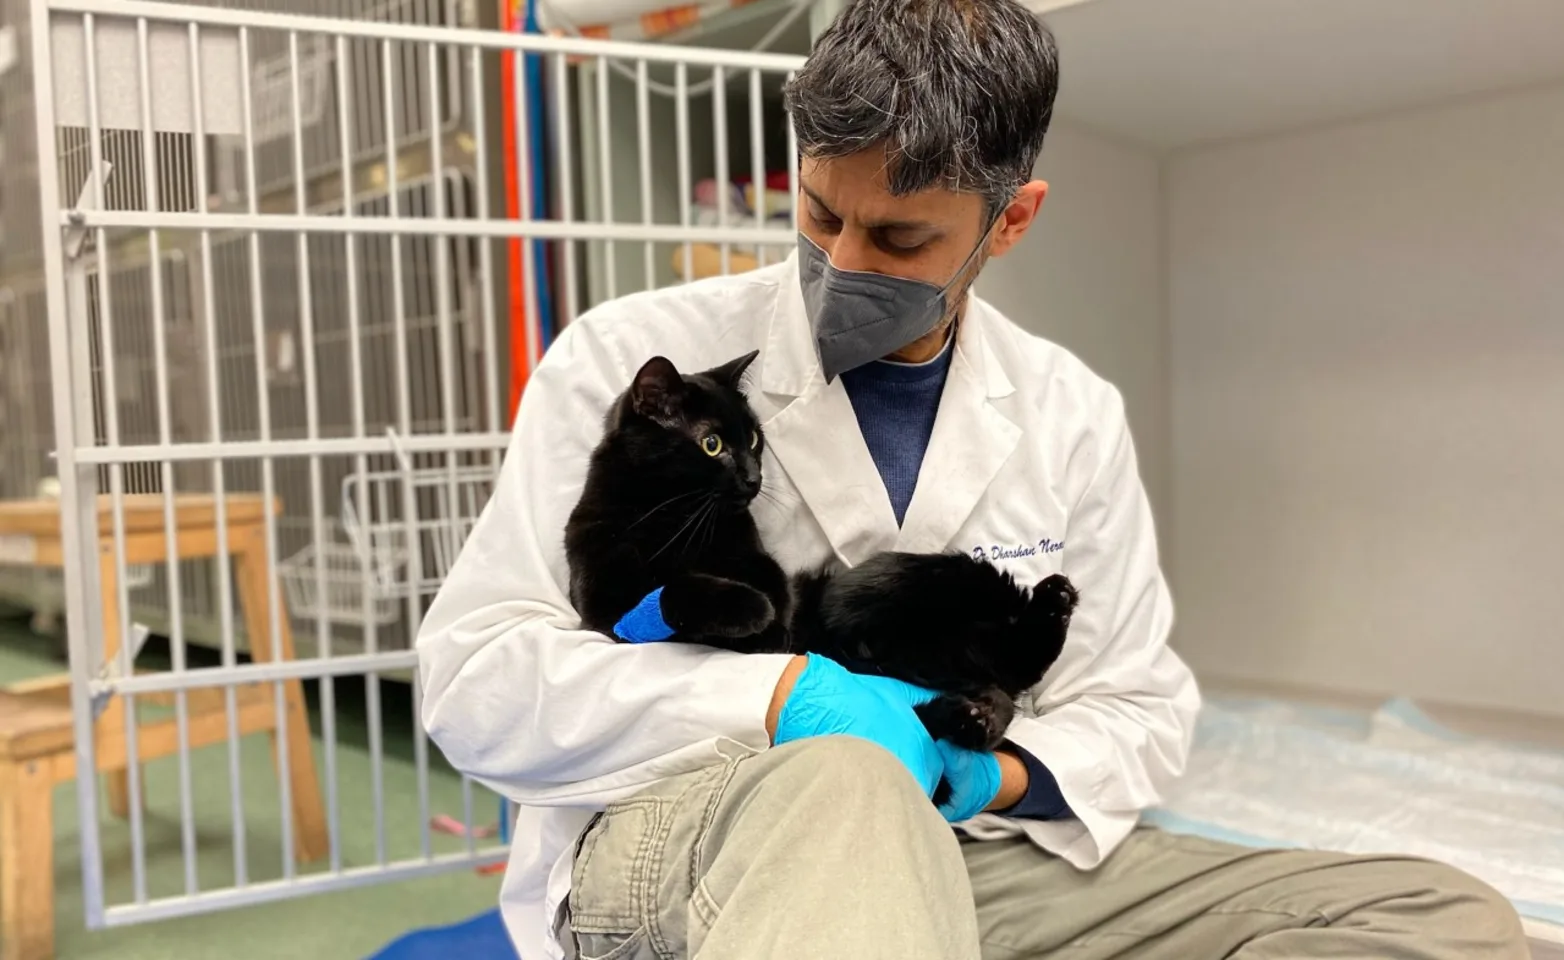 Dr. Neravanda, head of DCES Neurology, cradles a black cat on the ground beside an open cage, showcasing compassionate care in the clinic's treatment area.